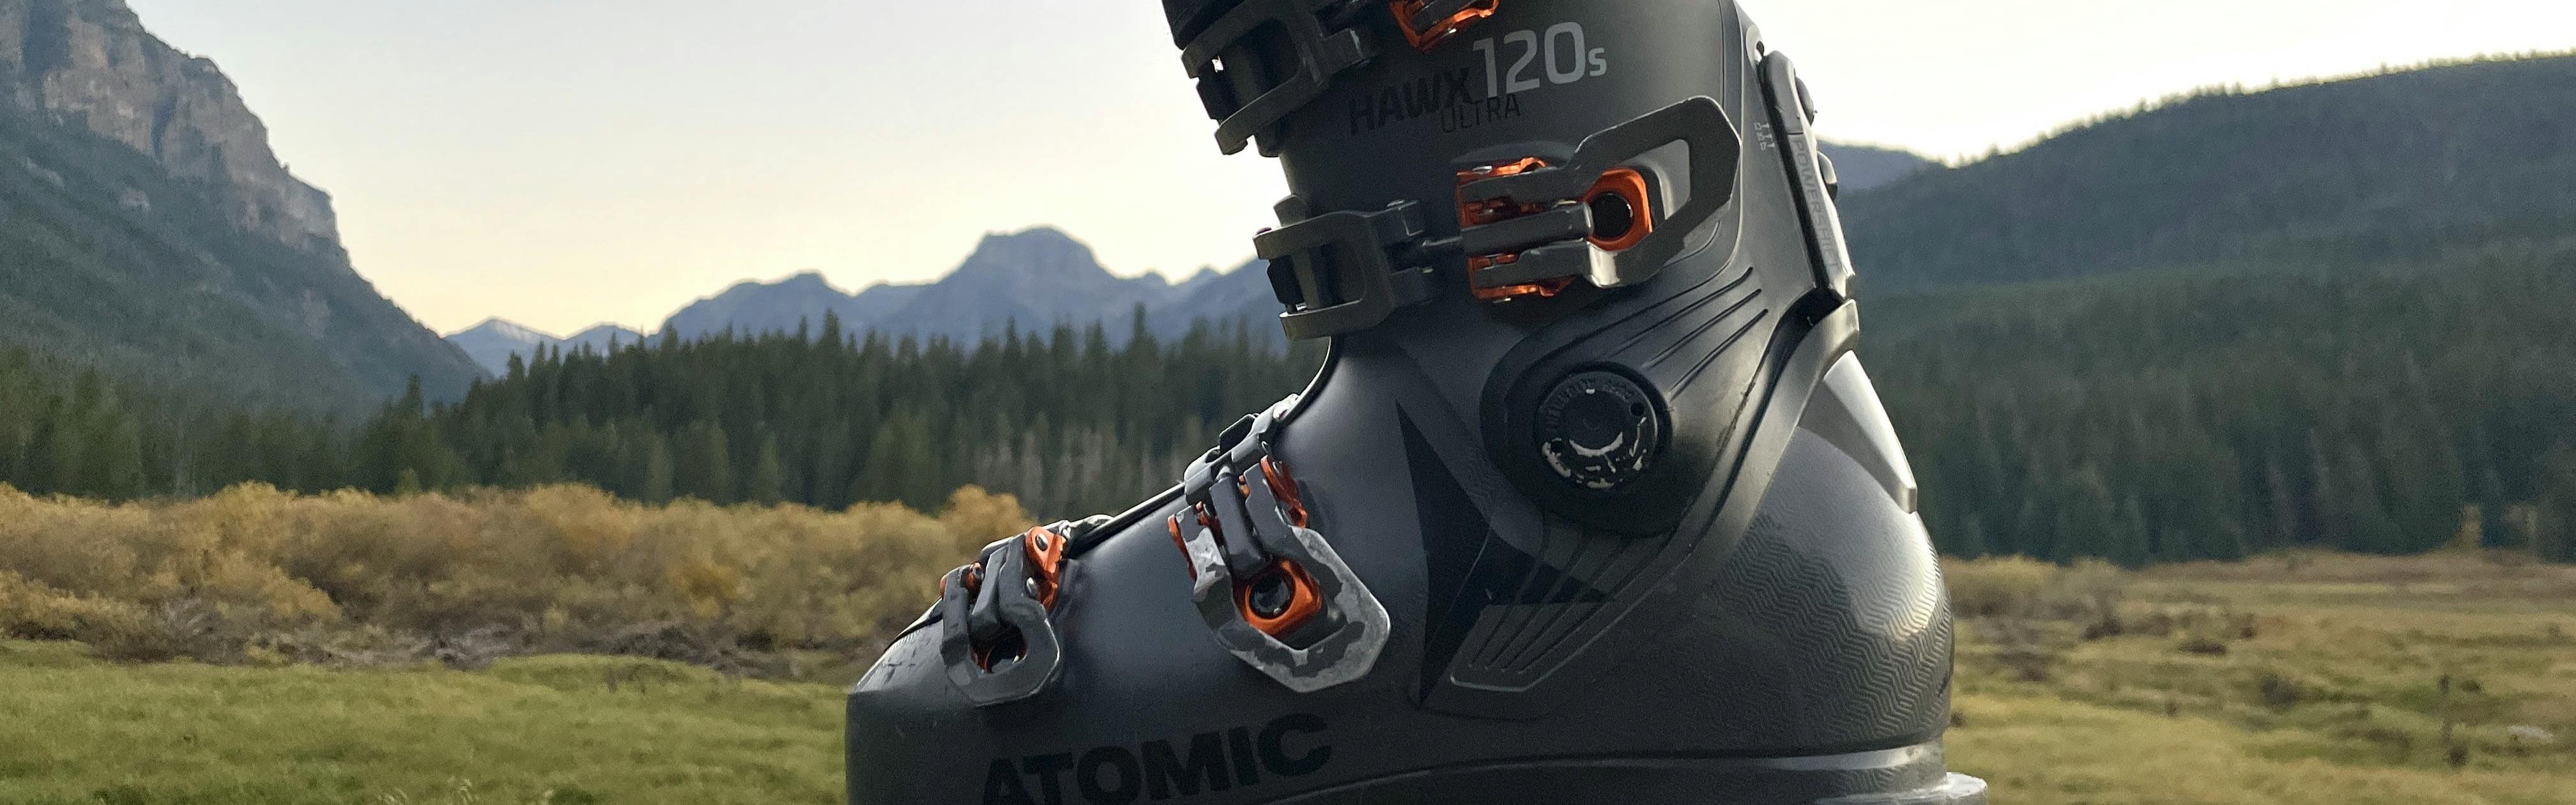 The Atomic Hawx Ultra 120 S Ski Boots · 2020 with a mountain in the background. 